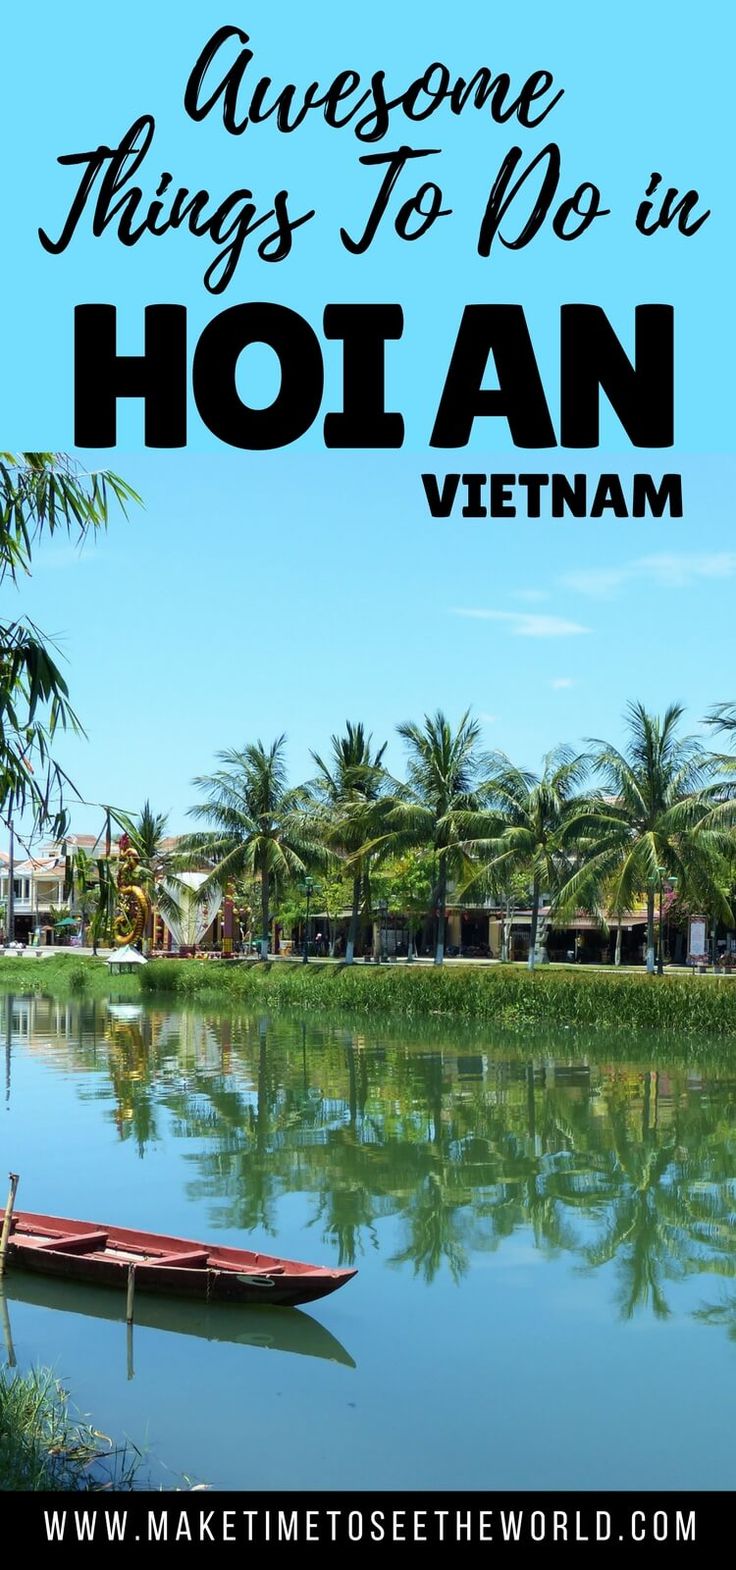 Top 5 things you can do in hoi an, vietnam - the following somewhere The rooms start at